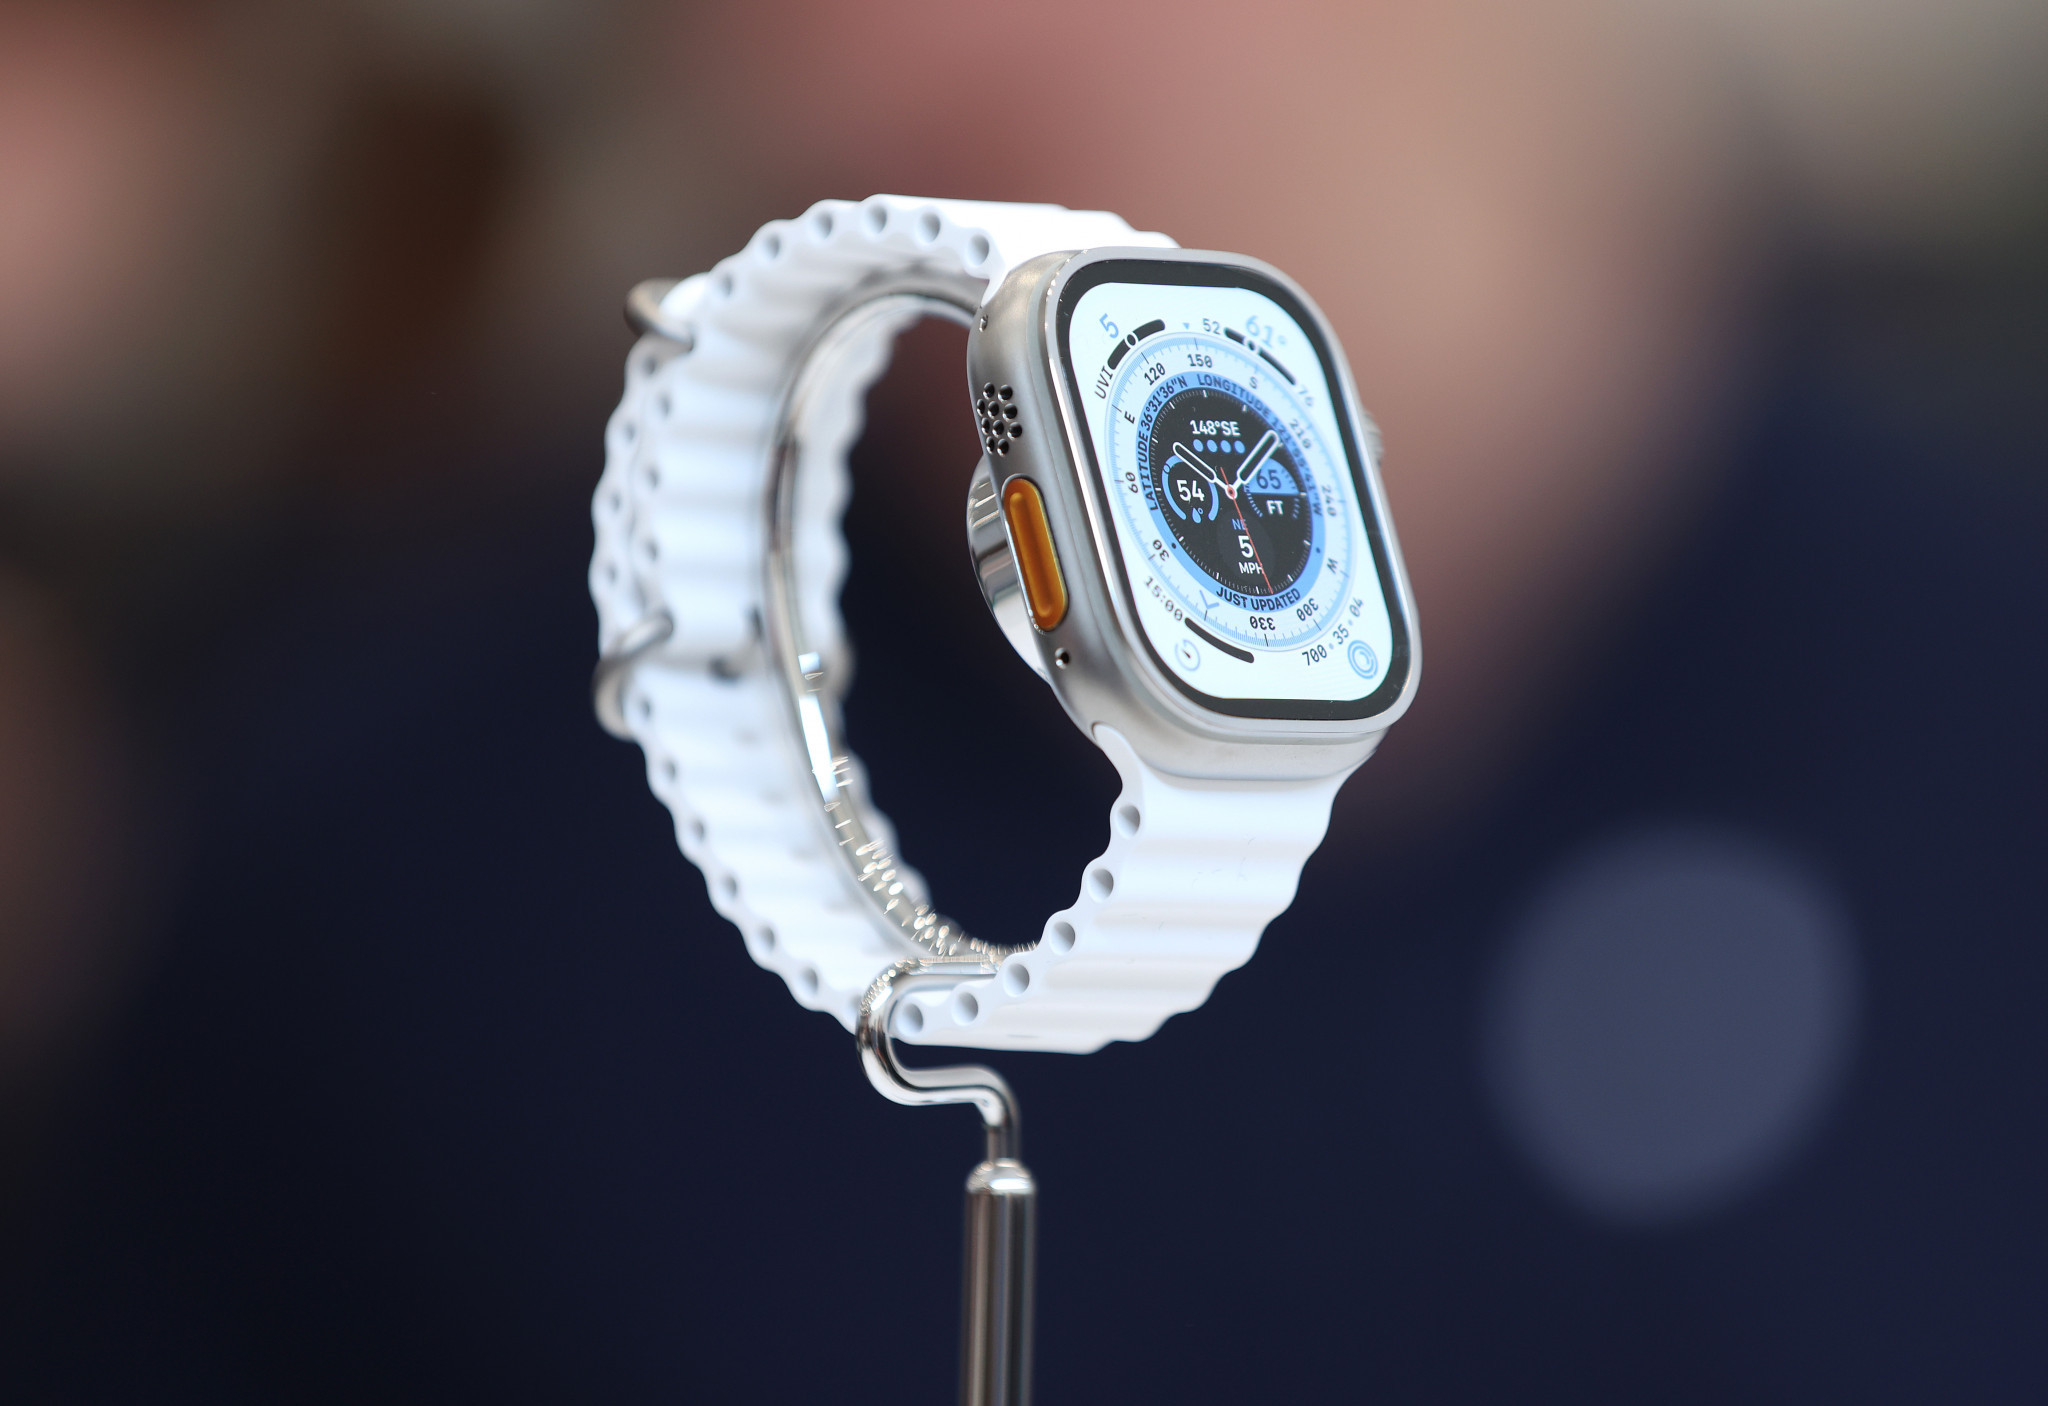 Apple Watches set to be worn by athletes in World Surf League Championship Tour opener